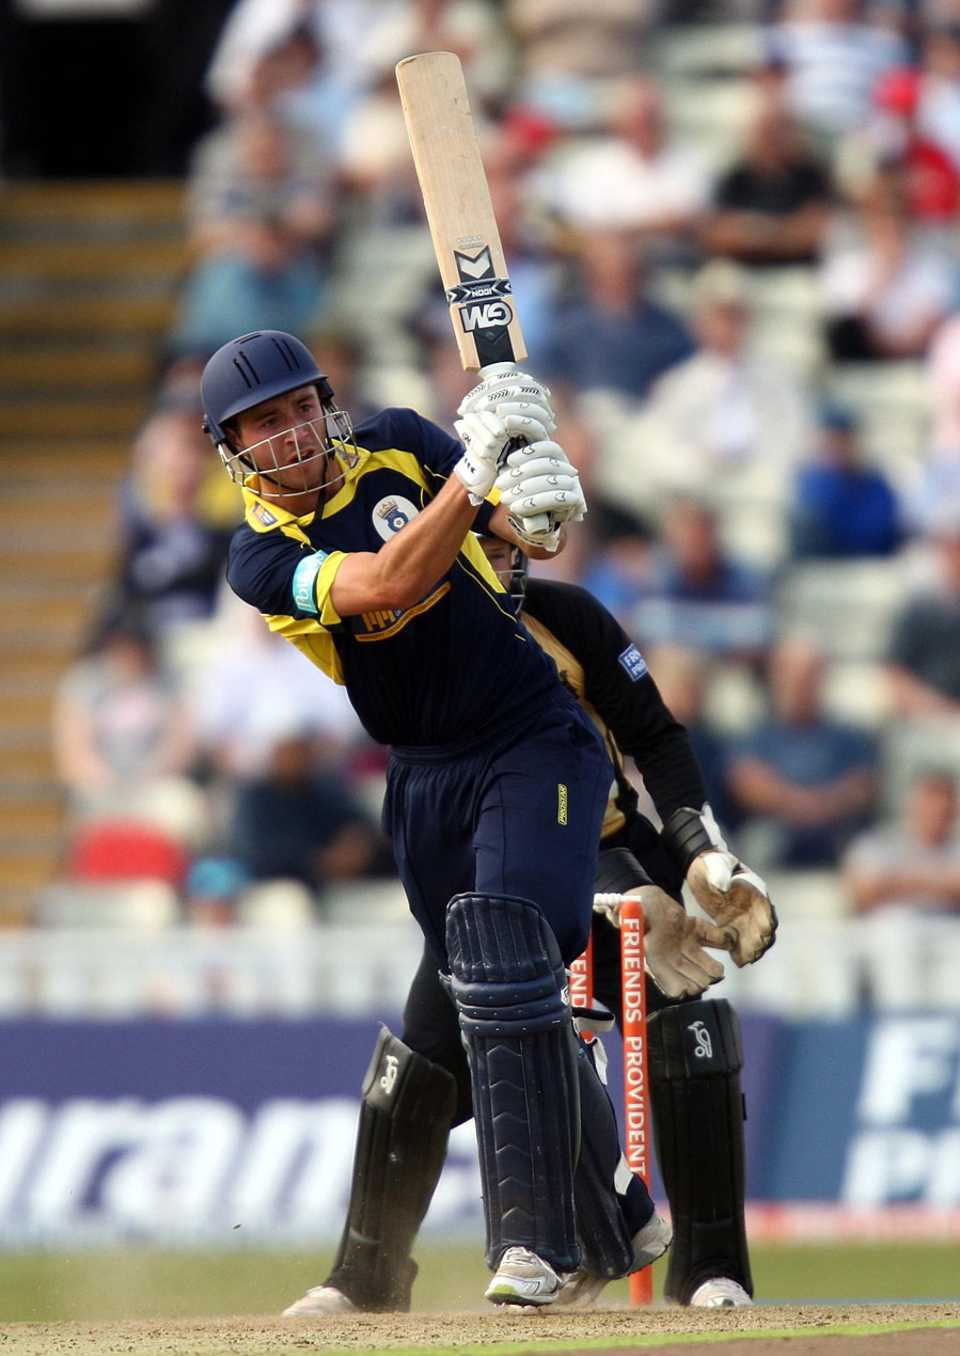 James Vince made 66 from 52 deliveries to take Hampshire into the semi-finals, Warwickshire v Hampshire, Quarter-final: Friends Provident t20, Edgbaston, July 26, 2010